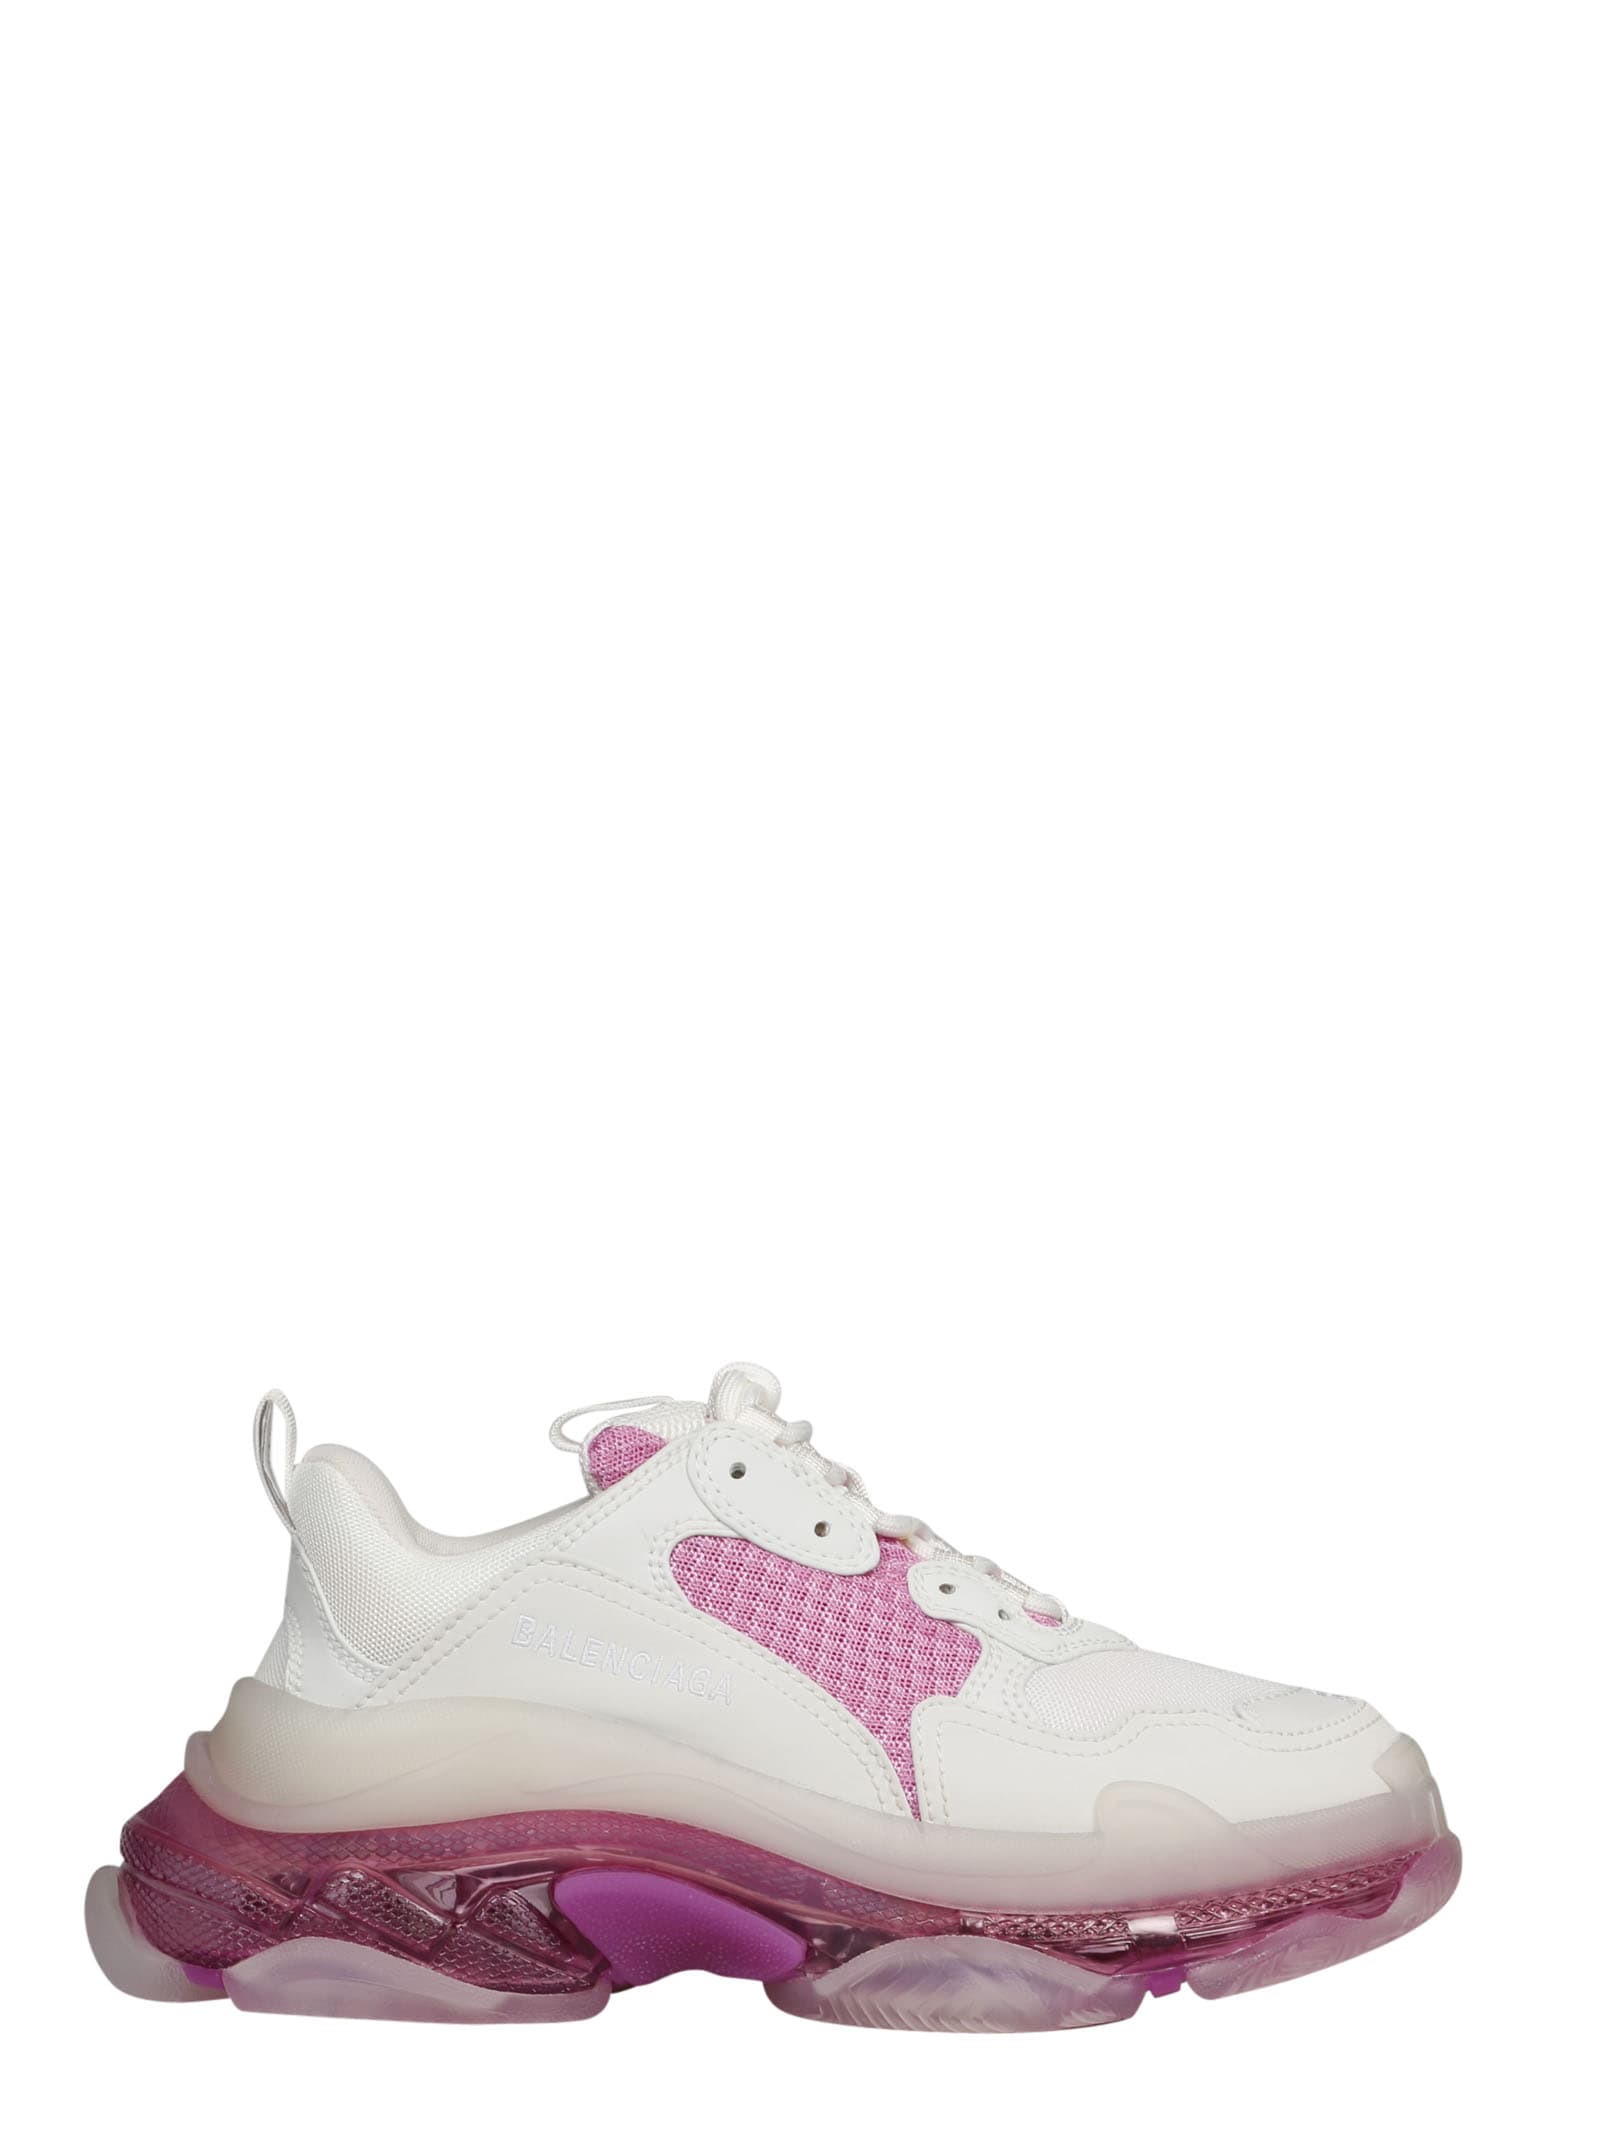 BALENCIAGA WHITE AND PINK TRIPLE S CLEAR SOLE,11295256